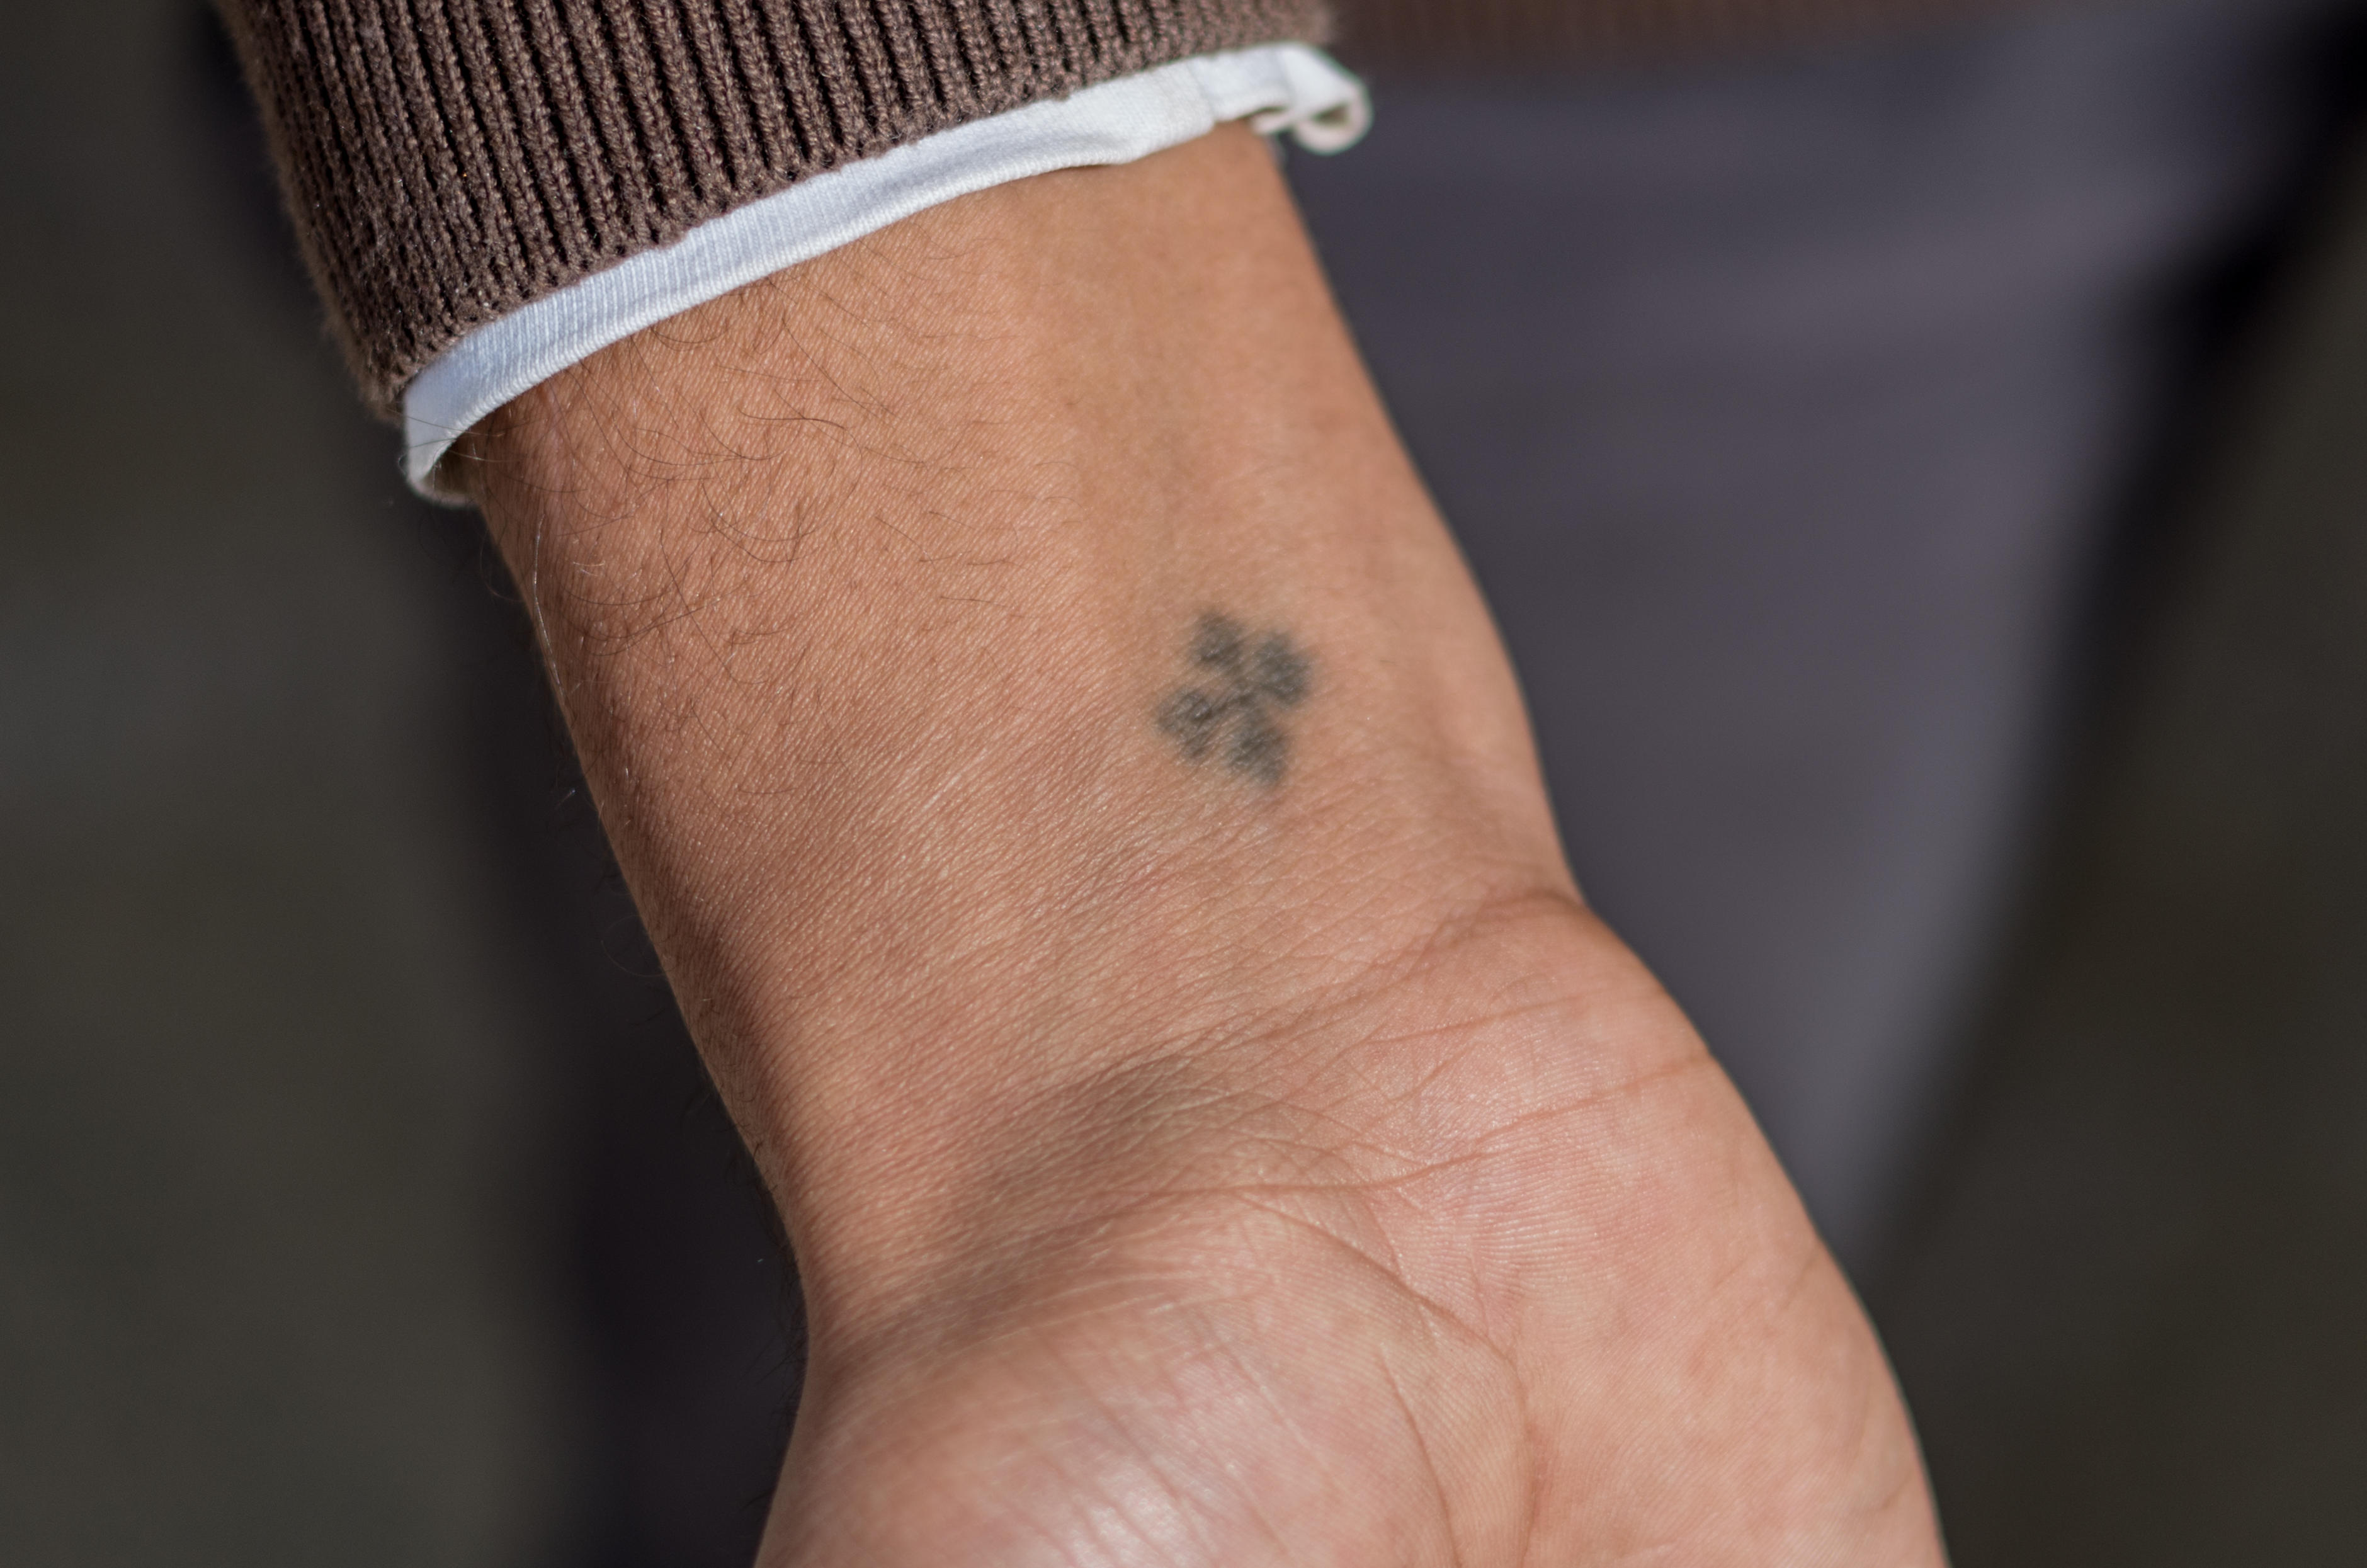 Open - Coptic Cross Tattoo Designs - Free Transparent PNG Download - PNGkey